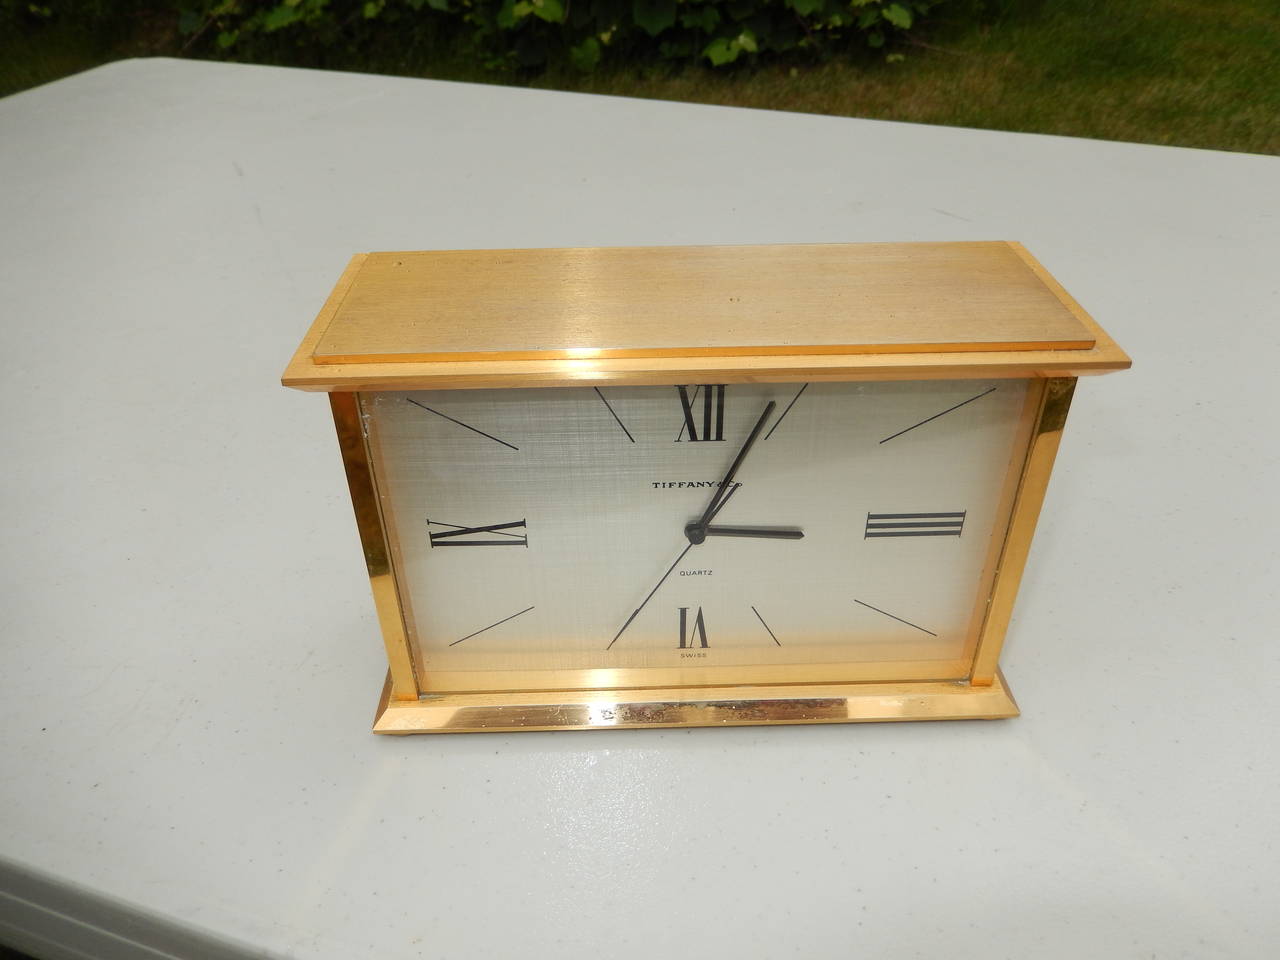 A 1970s Tiffany & Co solid brass desk or table clock.